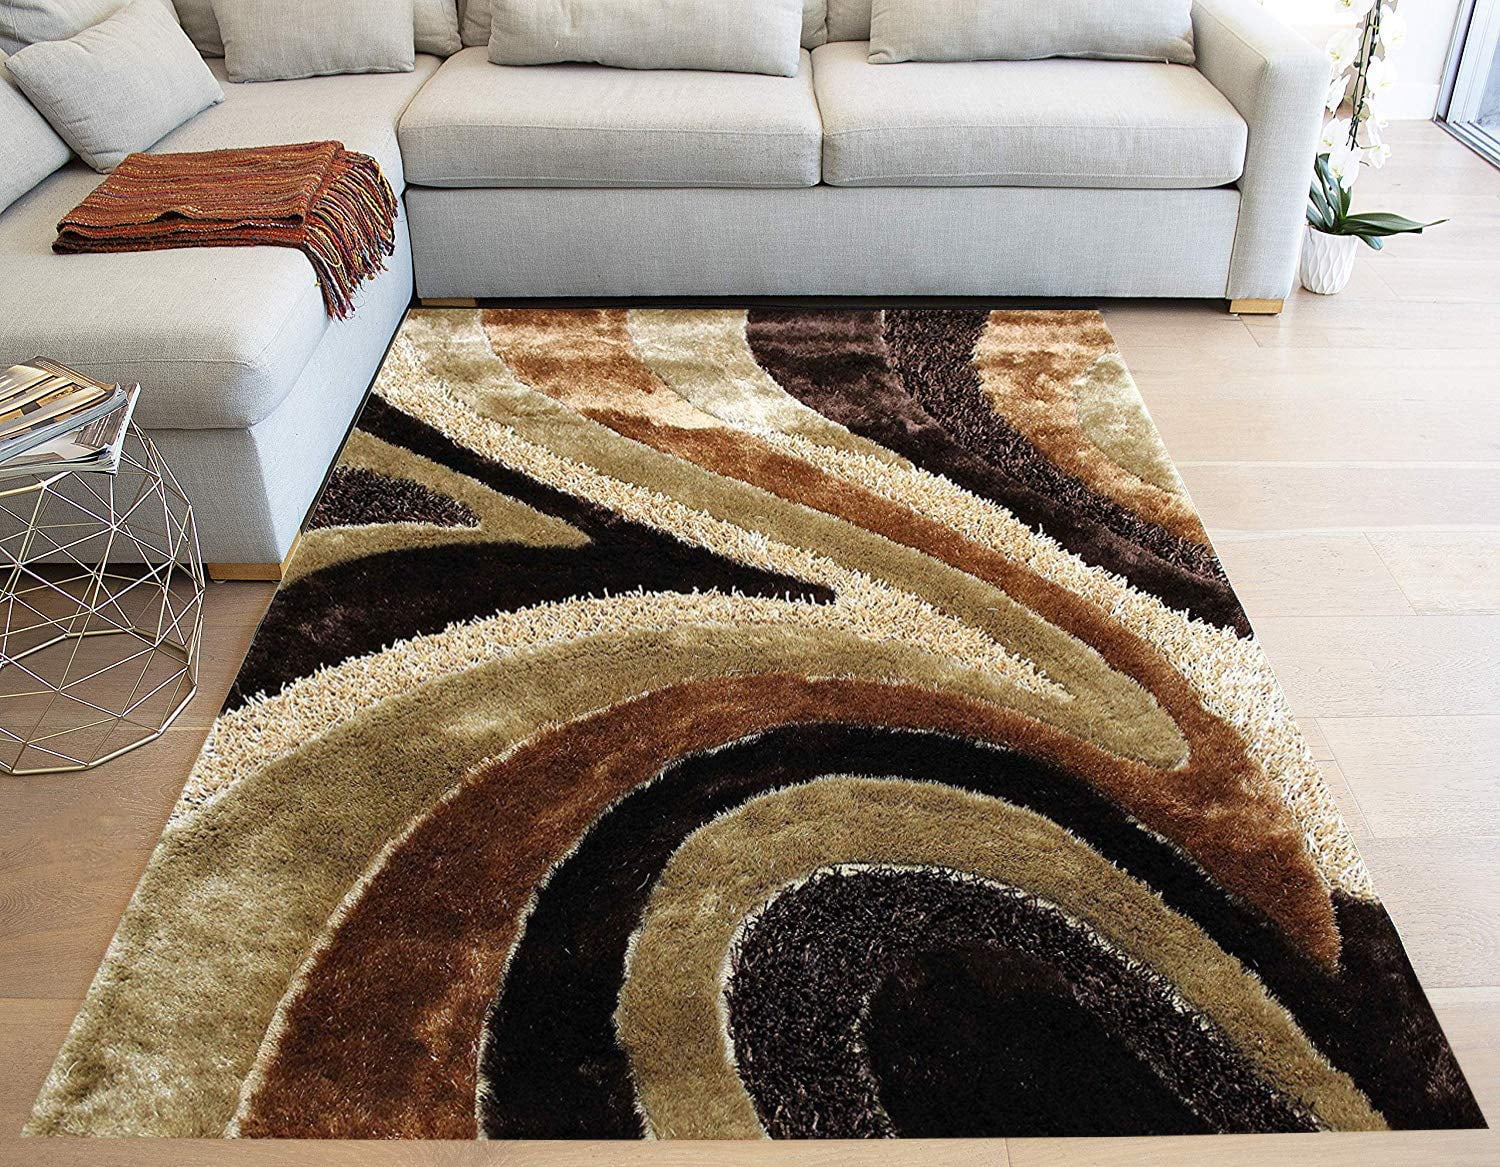 Gold Shaggy Hand-Woven Rug CLEARANCE STOCK up to 70% off Retail Price 